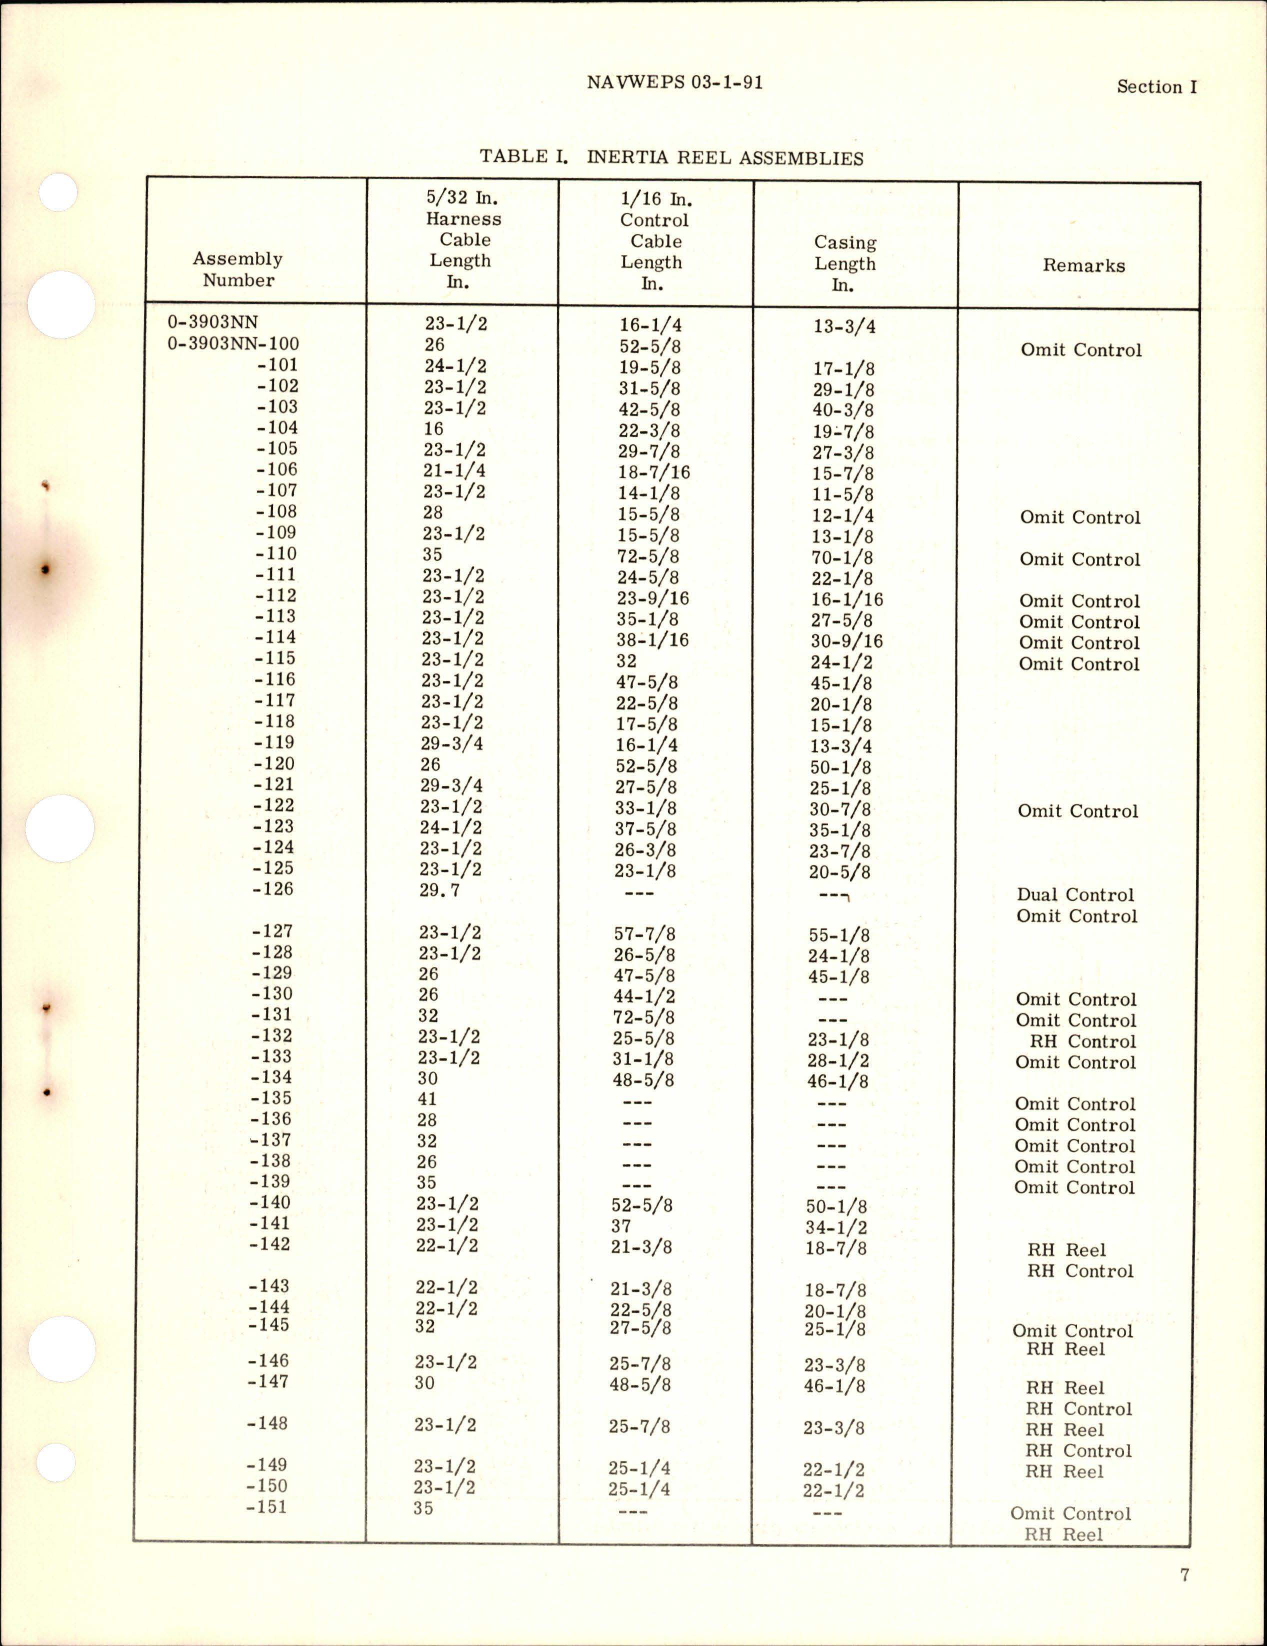 Sample page 9 from AirCorps Library document: Illustrated Parts Breakdown for Inertia Locking Reel - Models 0-3903NN and 0-4600 Series